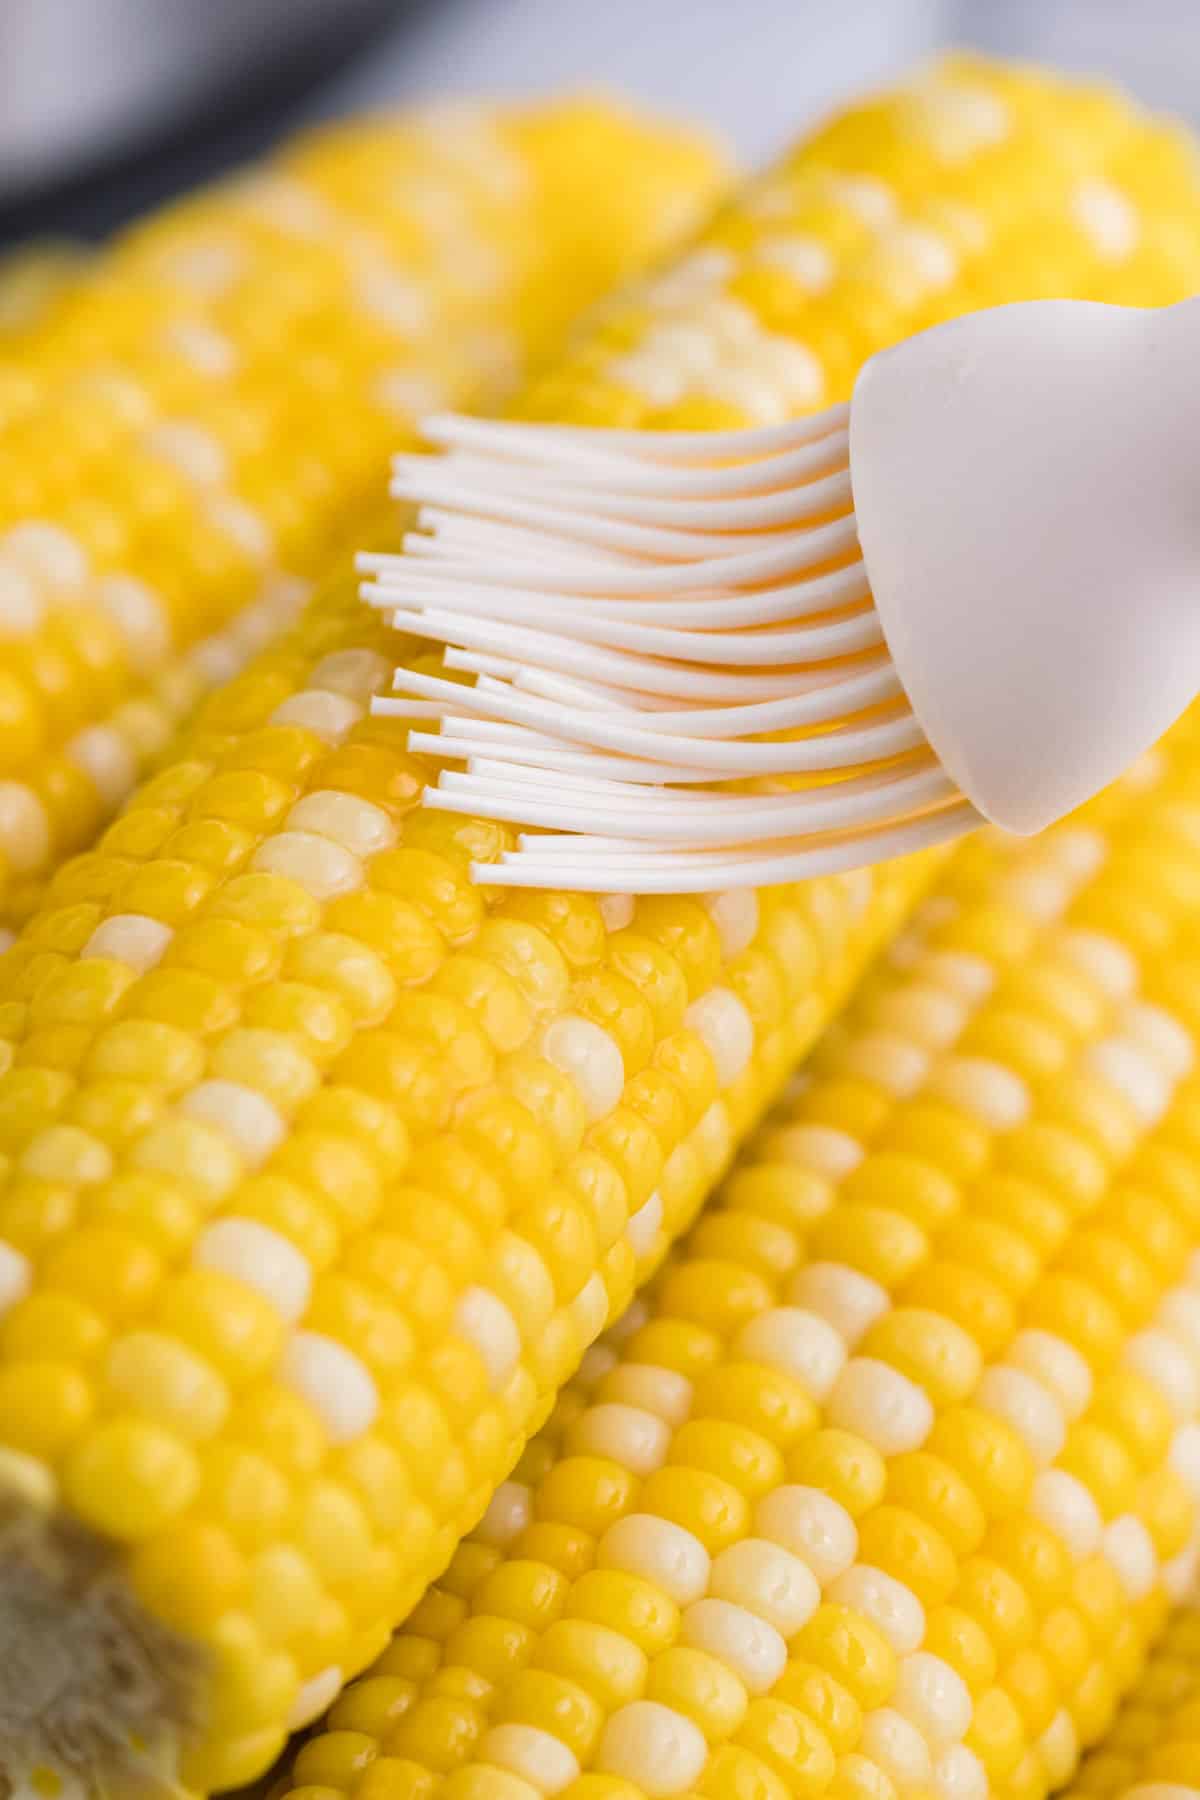 Corn on the cob brushed with melted butter using a pastry brush.